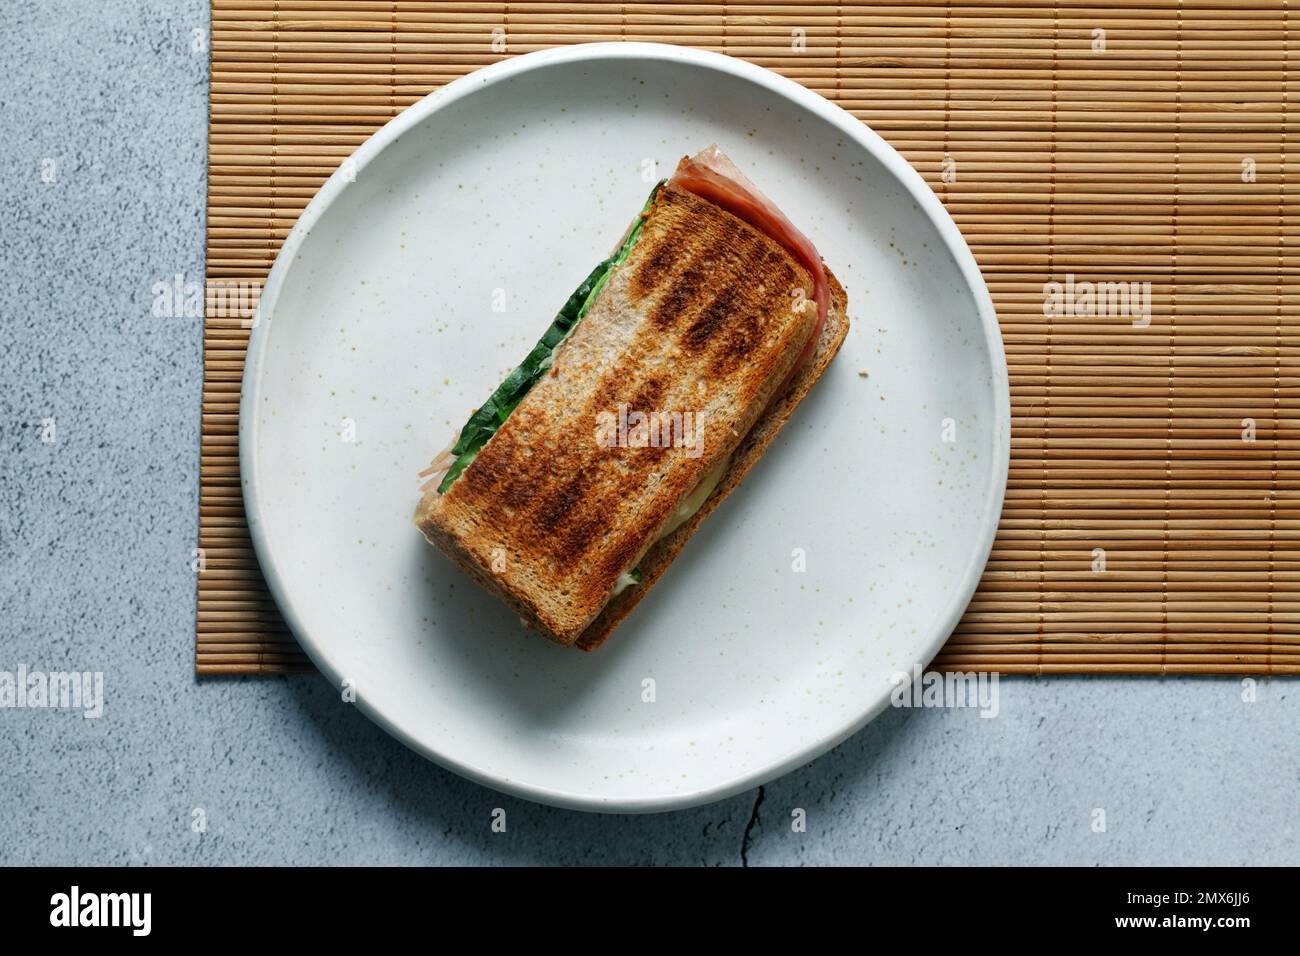 Toasted sandwich with lettuce,ham and cheese on a white plate. Stock Photo